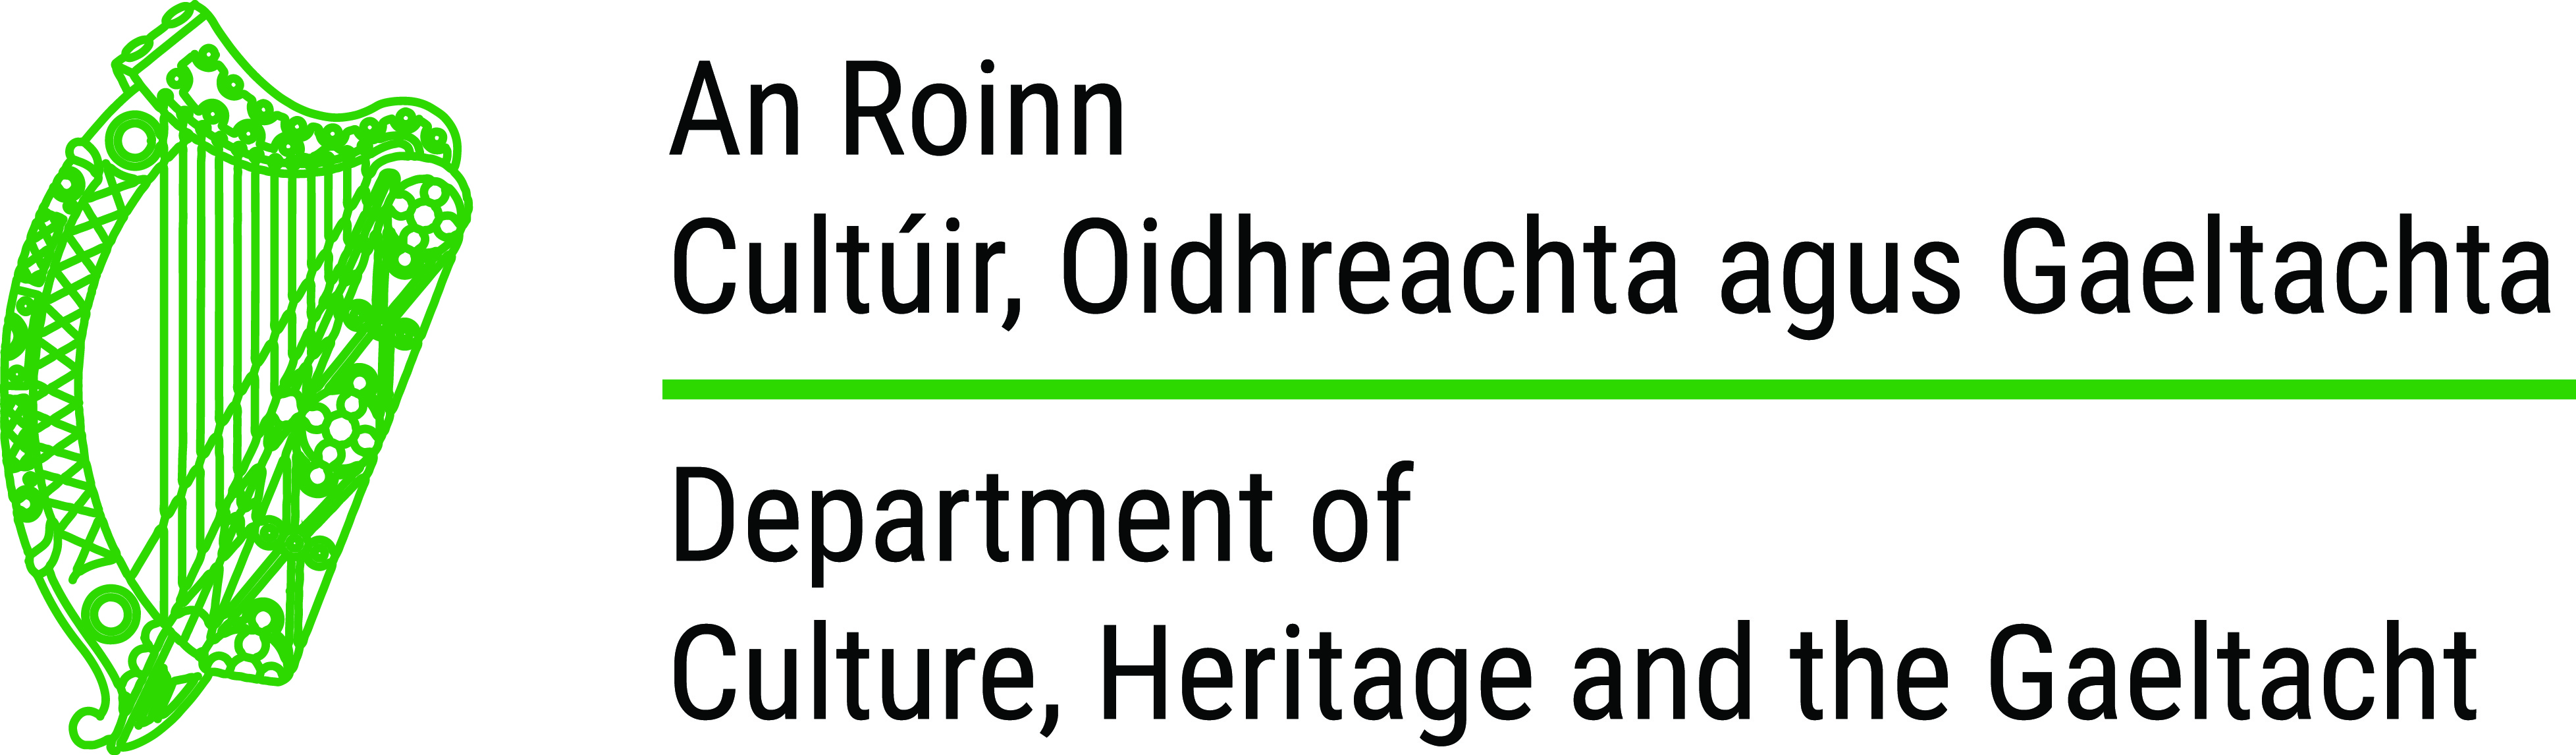 Culture-Heritage-Gaeltacht-High-Res-2